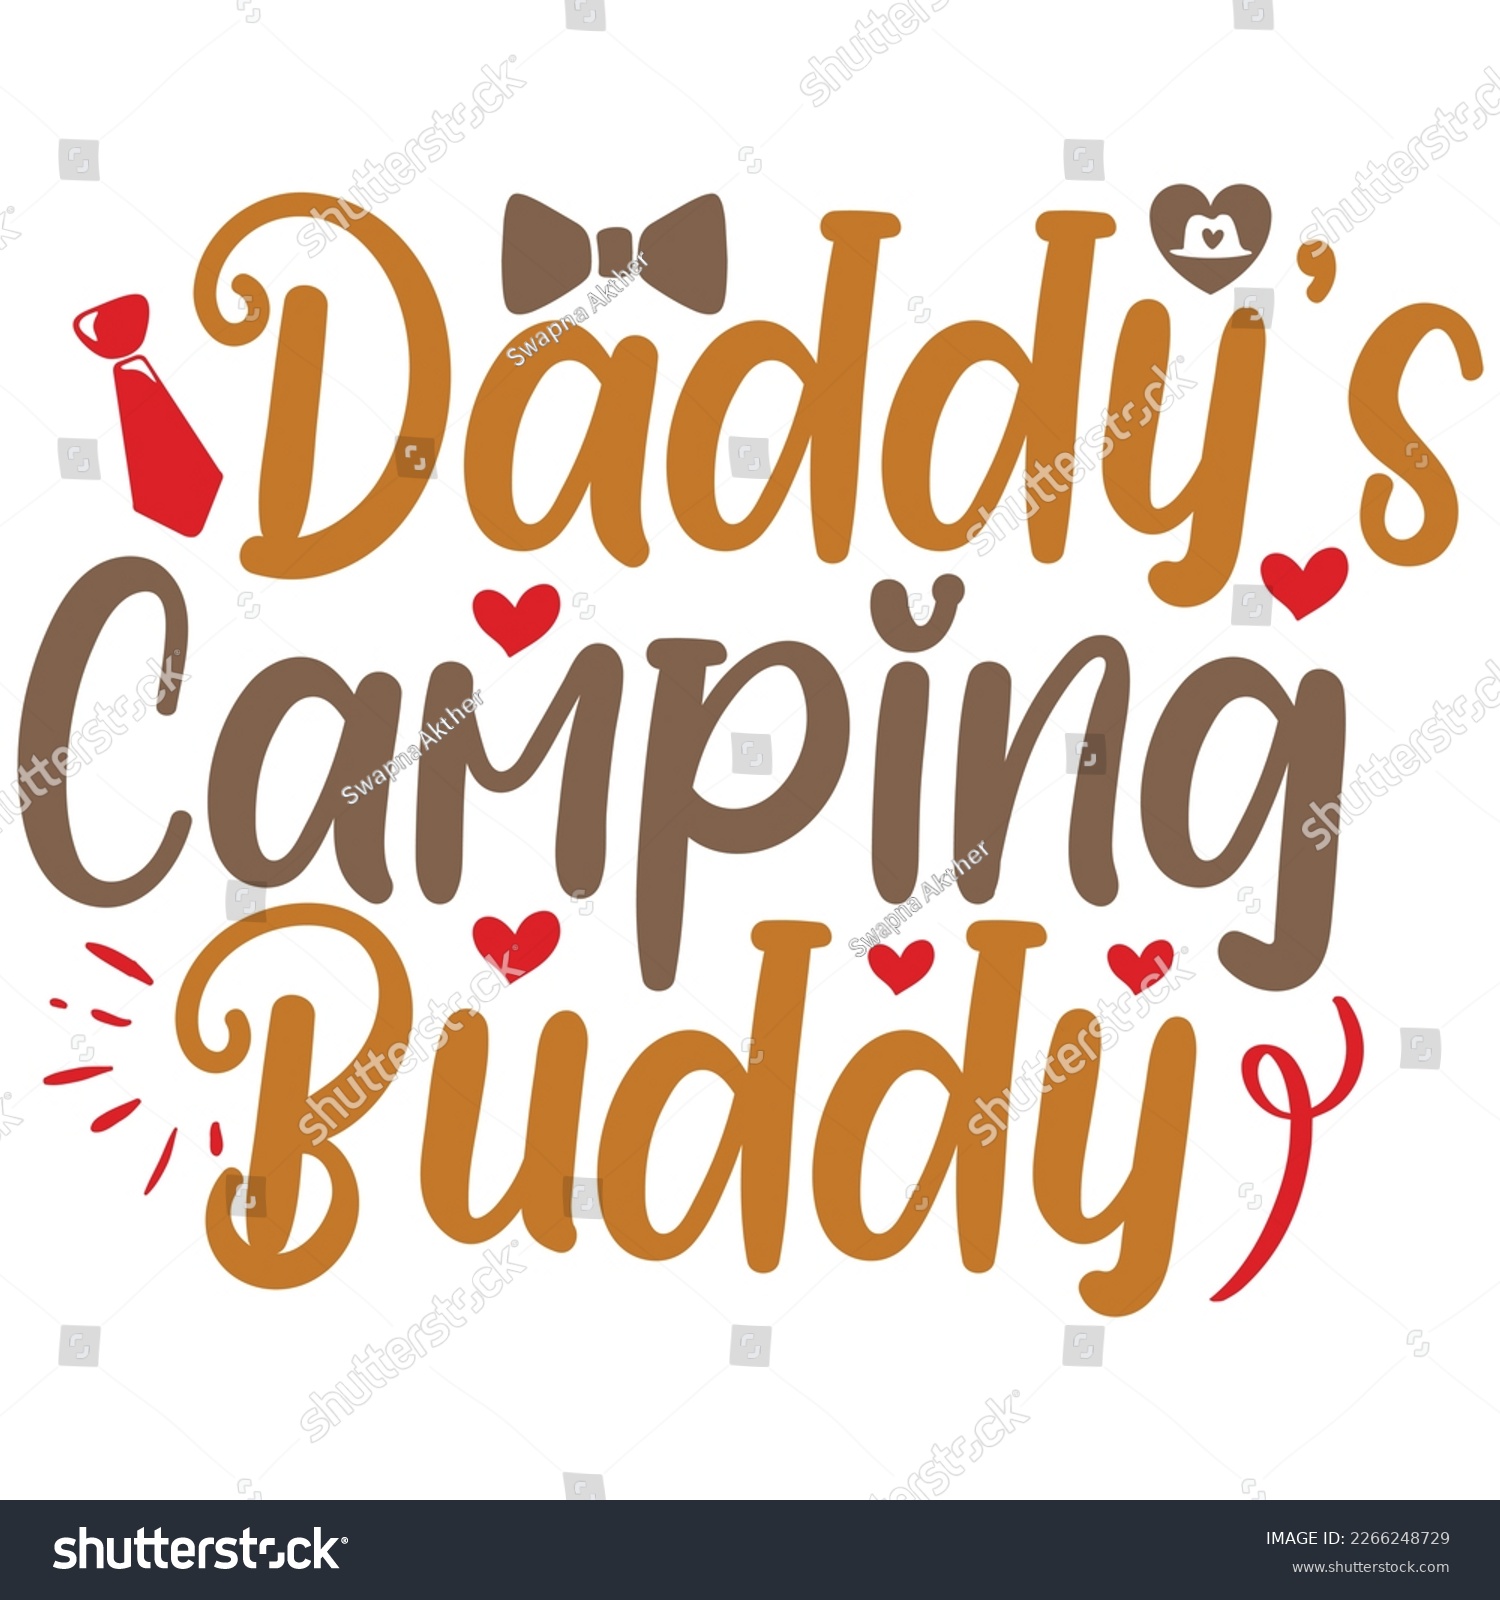 SVG of Daddy’s Camping Buddy - Dad Retro T-shirt And SVG Design. Retro Happy Father's Day, Motivational Inspirational SVG Quotes T shirt Design, Vector EPS Editable Files. svg